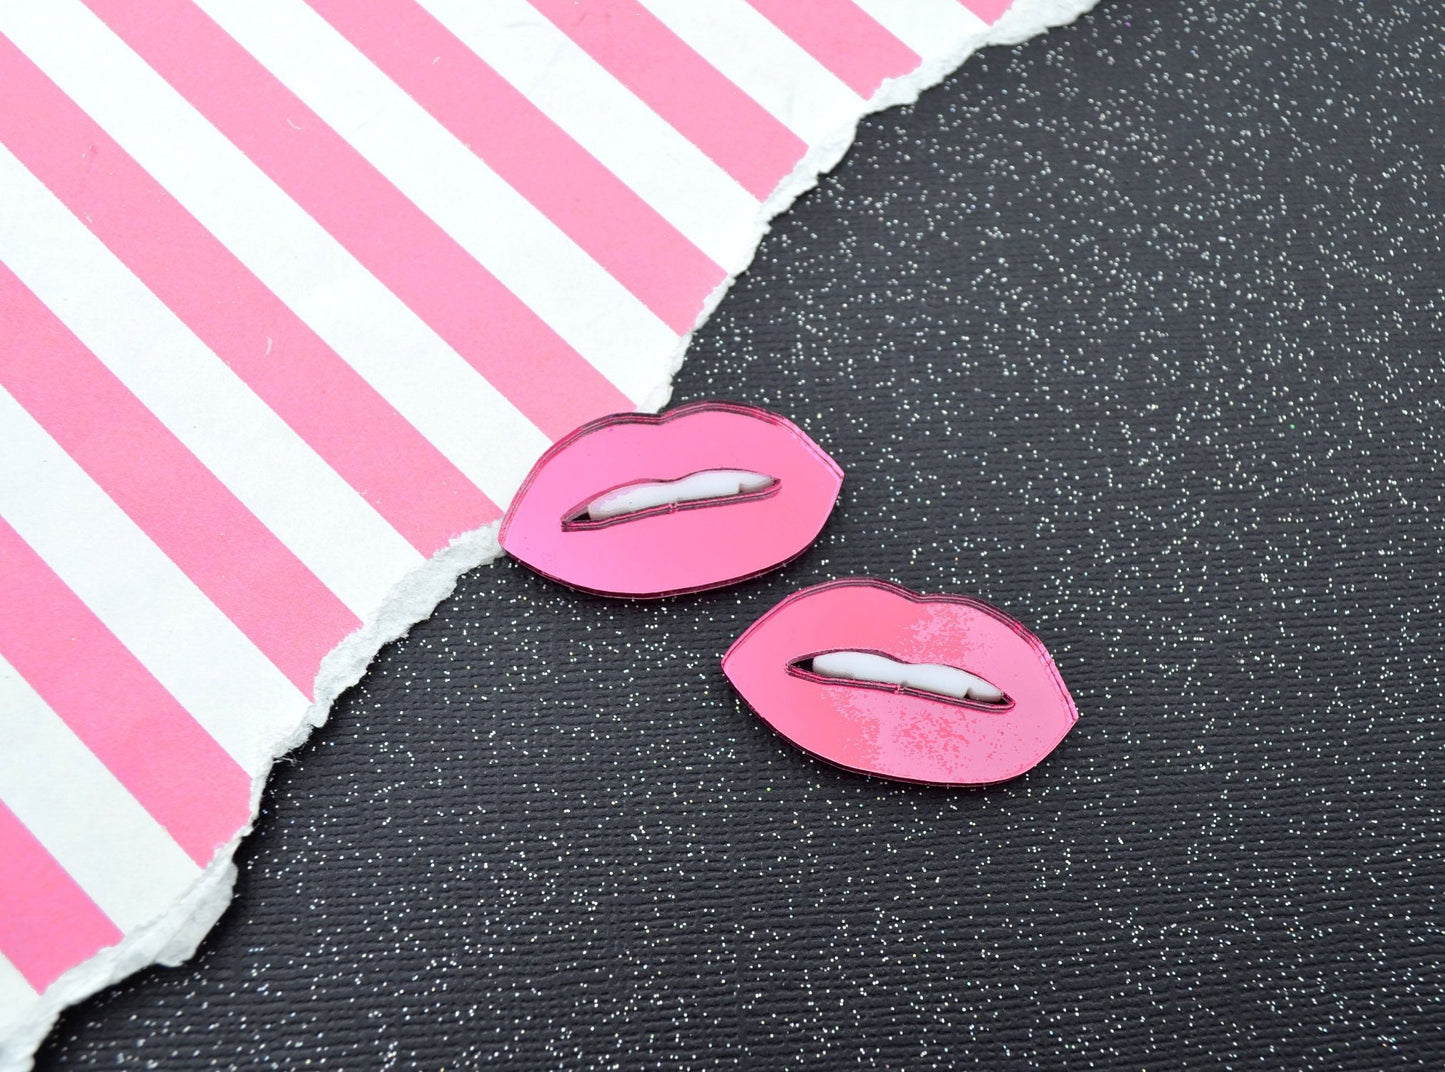 PINK MIRROR LIPS -  Mirrored with White Teeth - 1 Pair - Cabochons - Laser Cut Acrylic